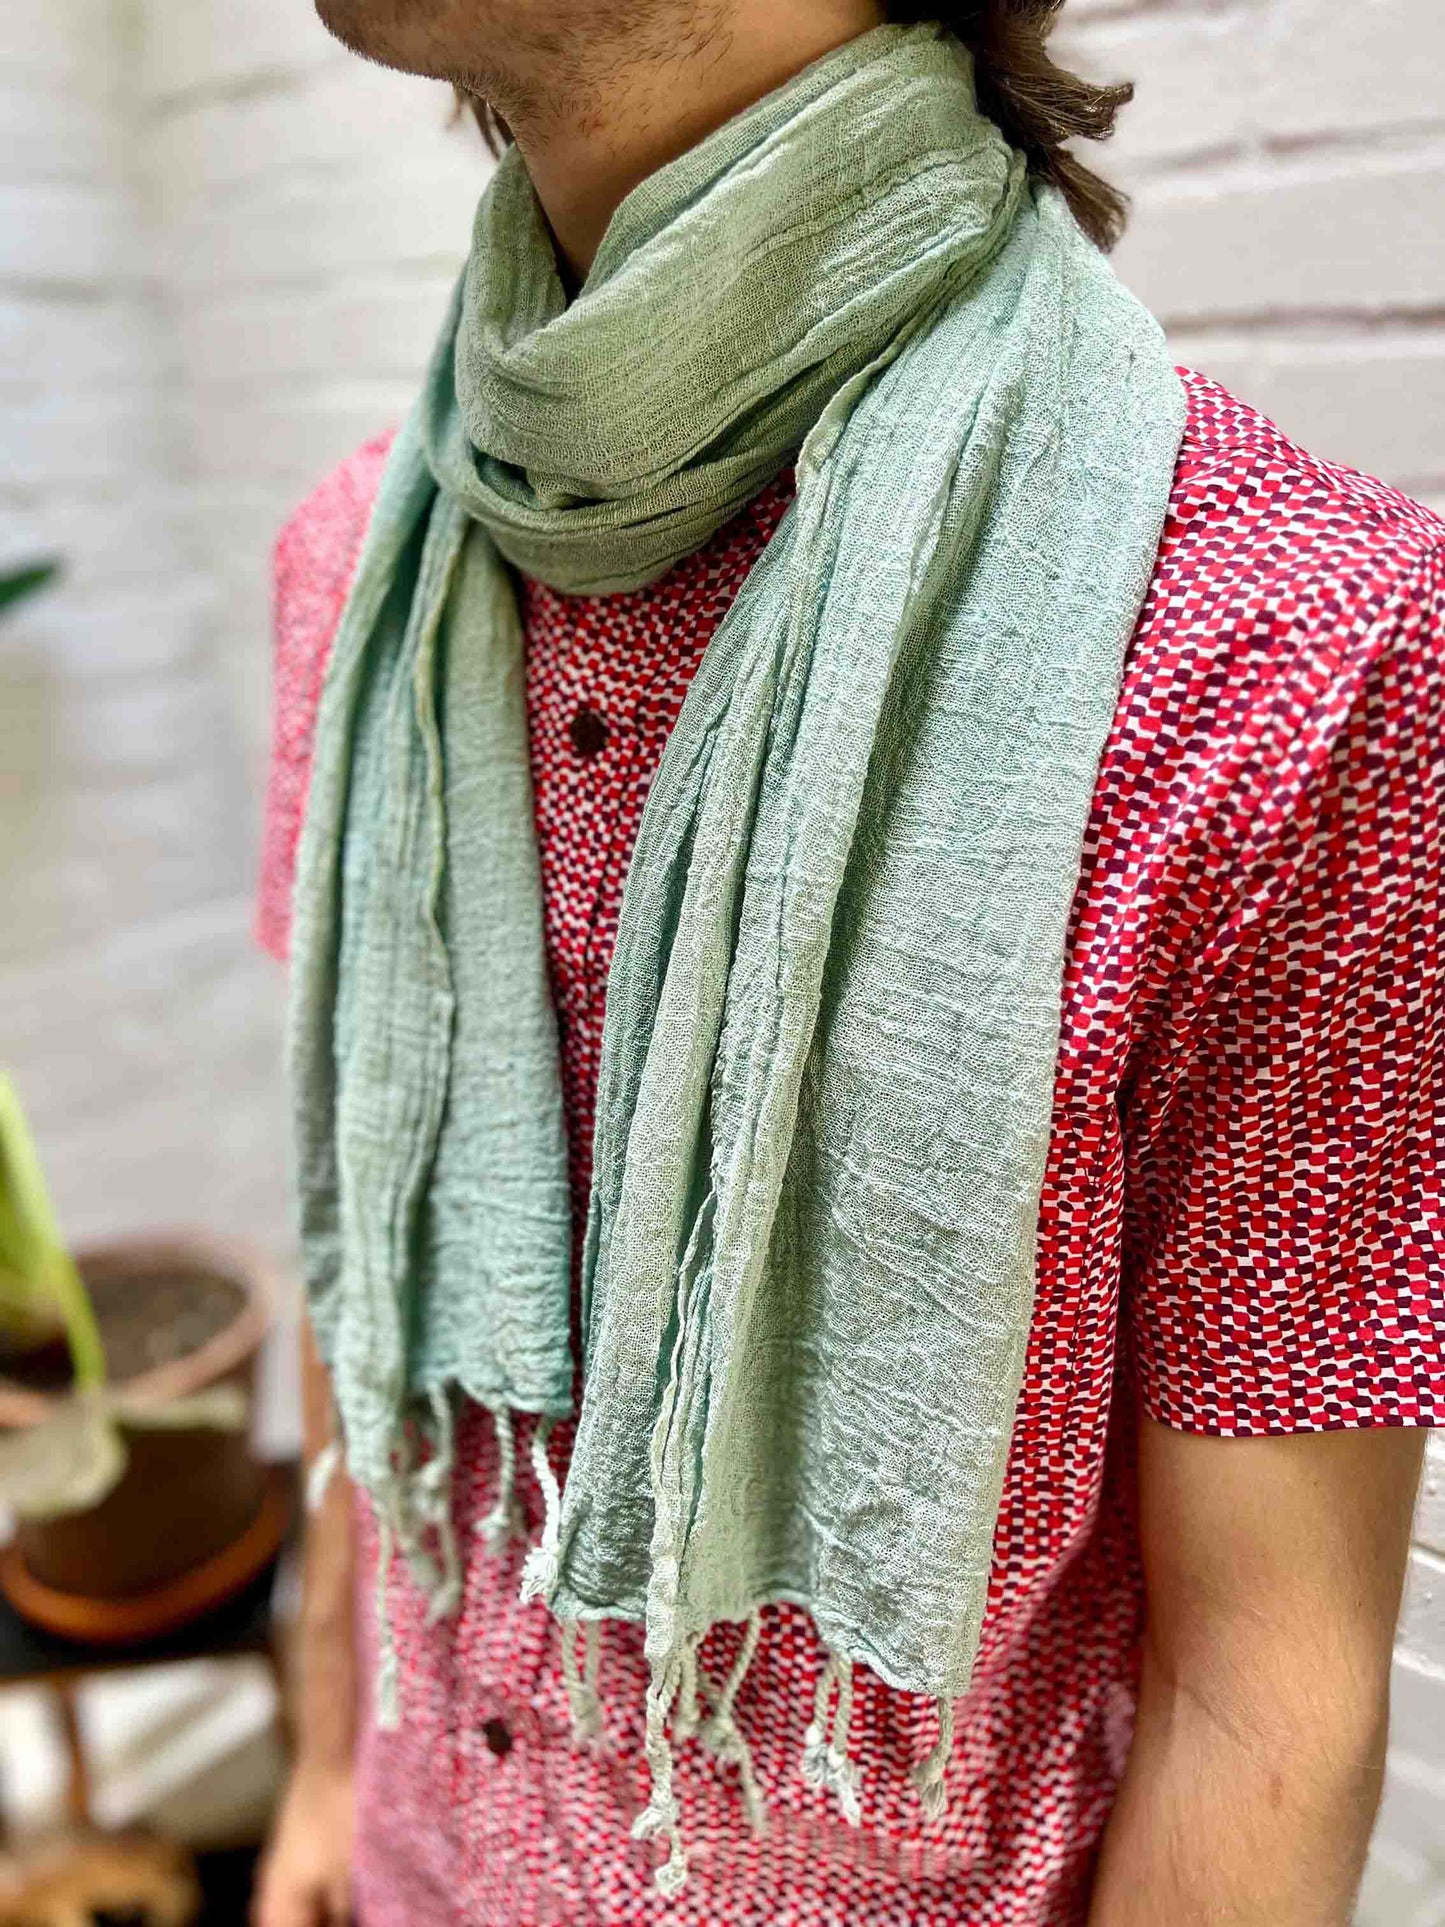 Duck egg blue/green scarf with tassels